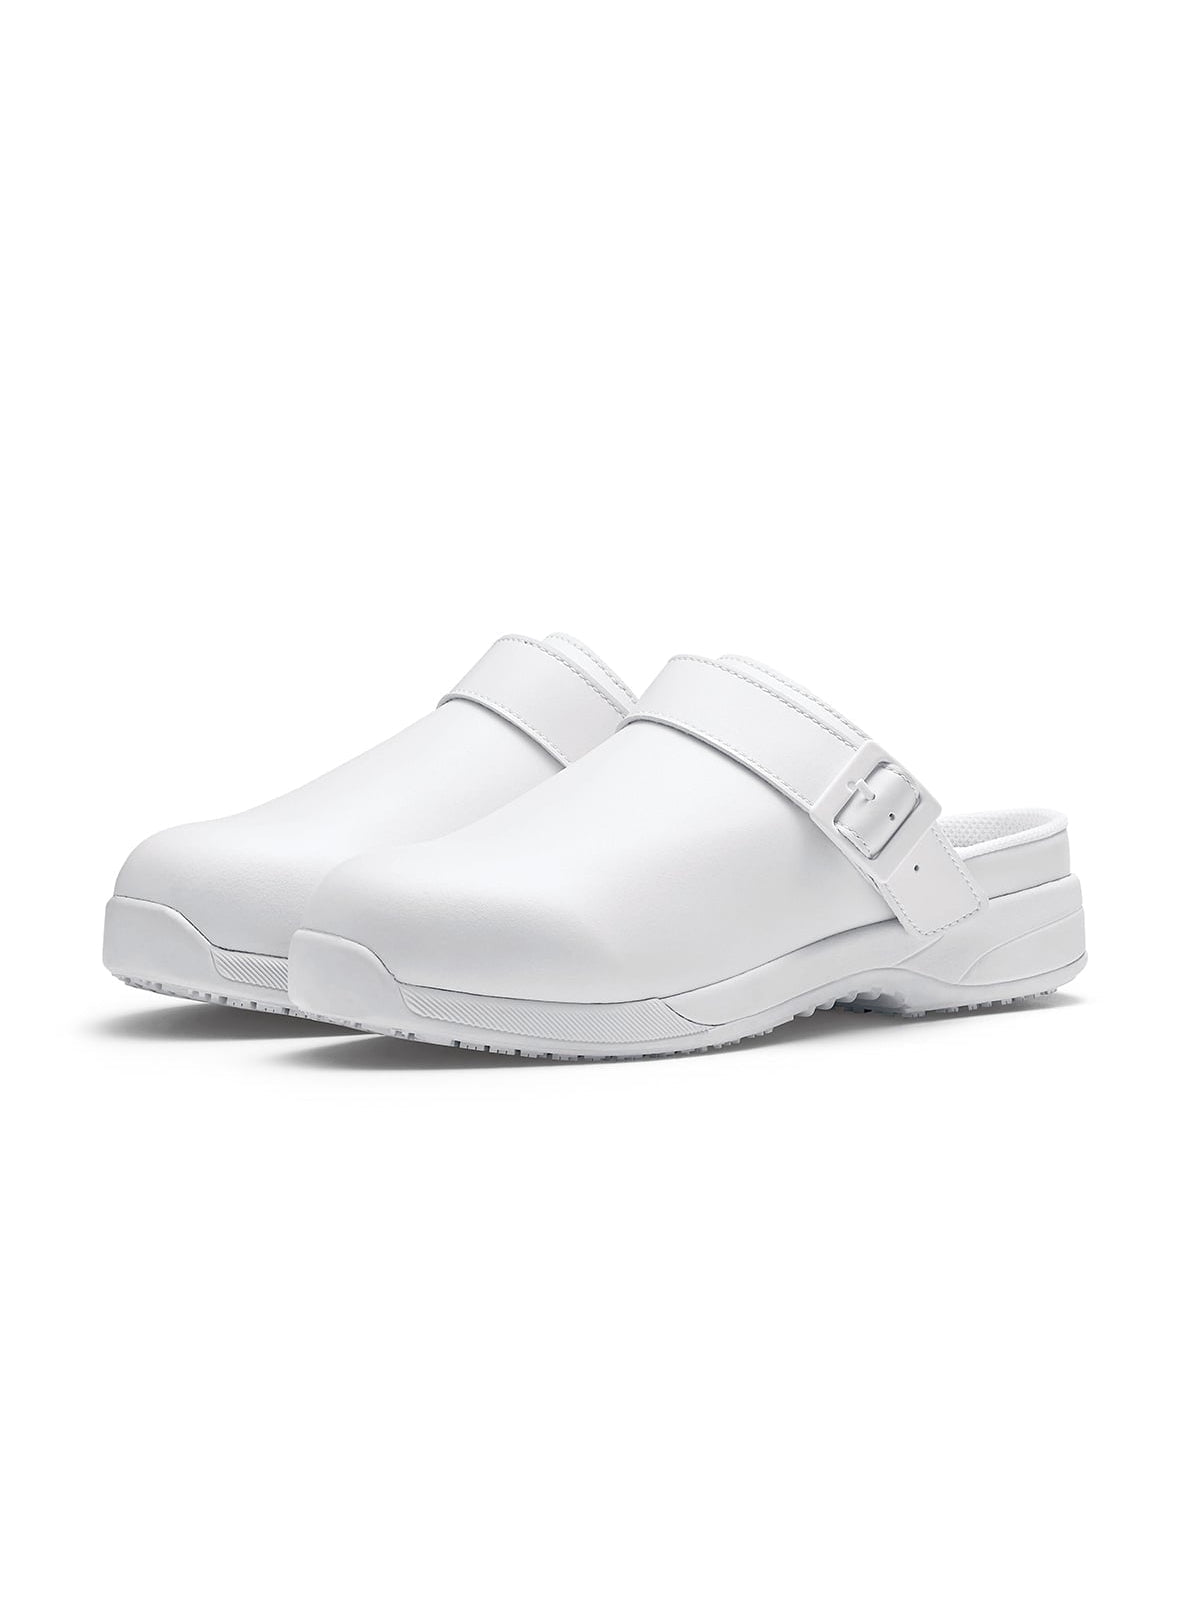 Unisex Work Shoe Triston II White by  Shoes For Crews.